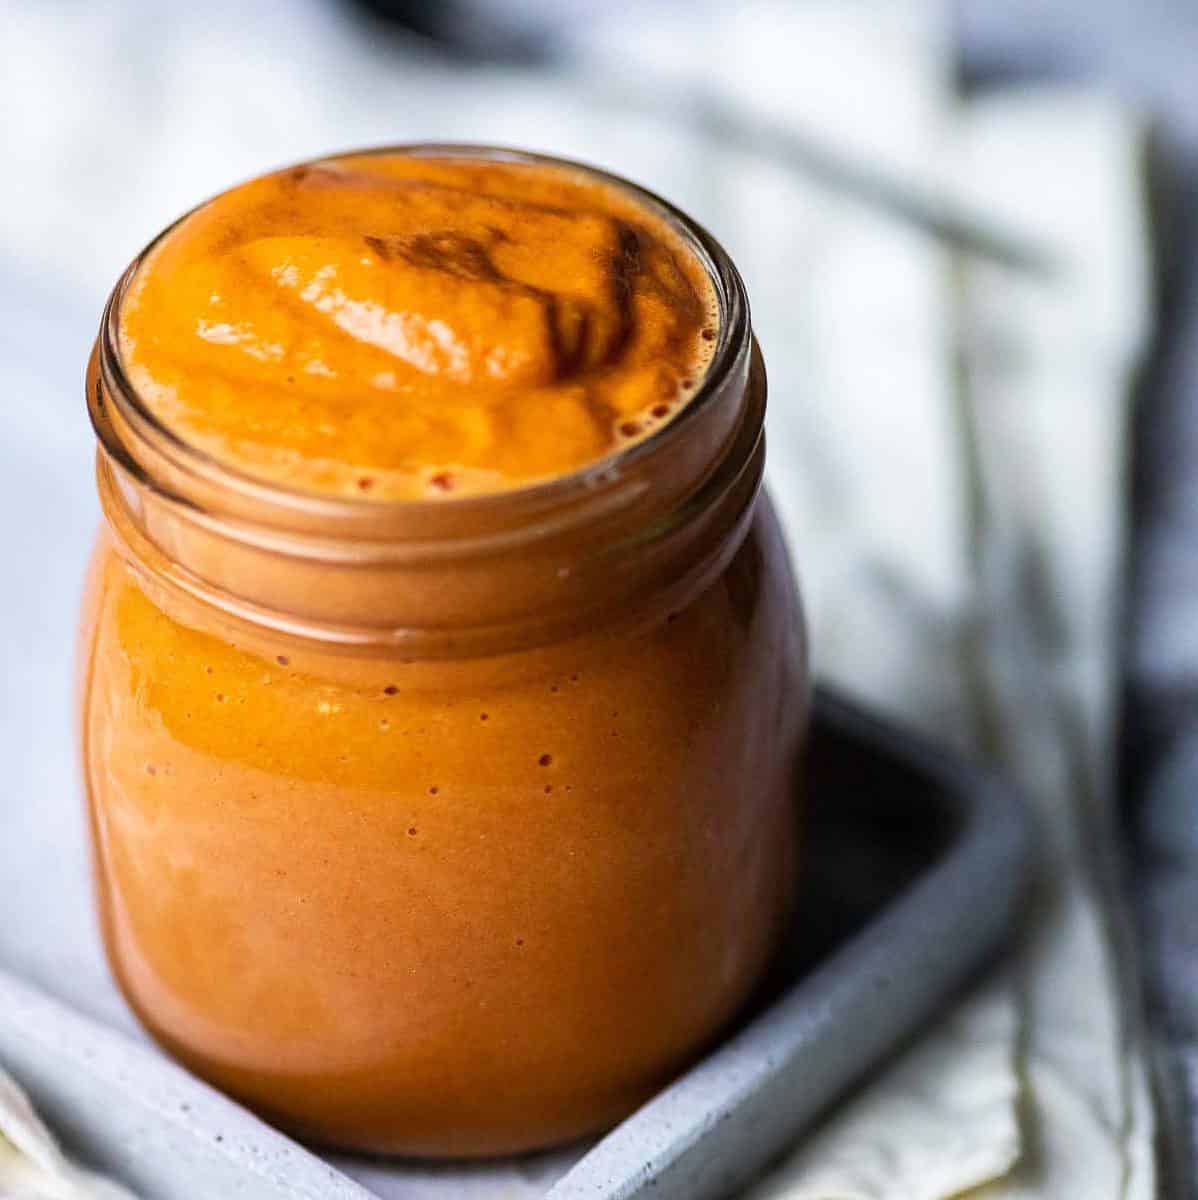  Whip up a batch of this tasty condiment in just minutes.